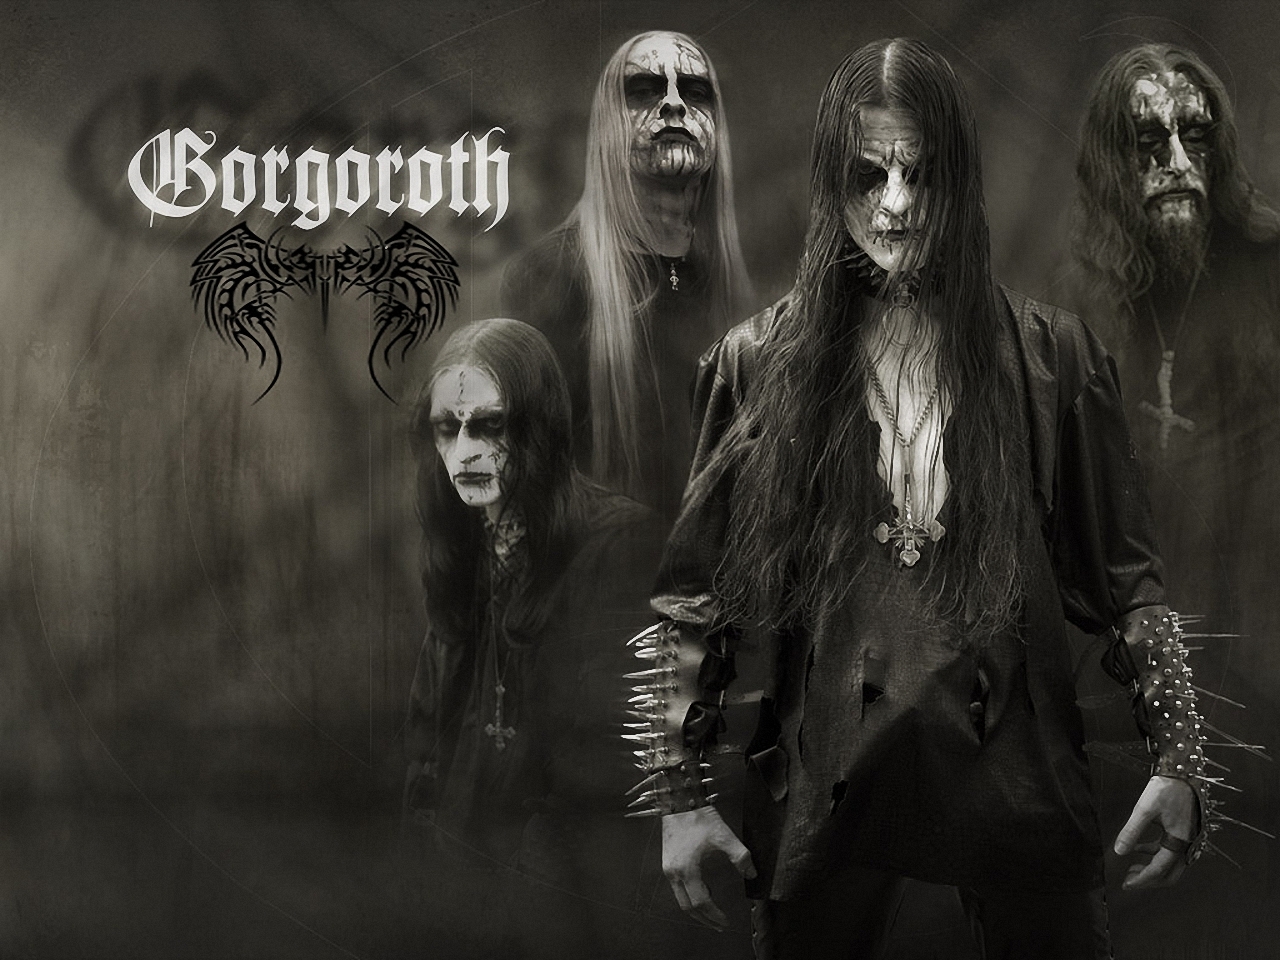 Clannad Is The Most Black Metal Thing On Earth, Lord Gorgoroth